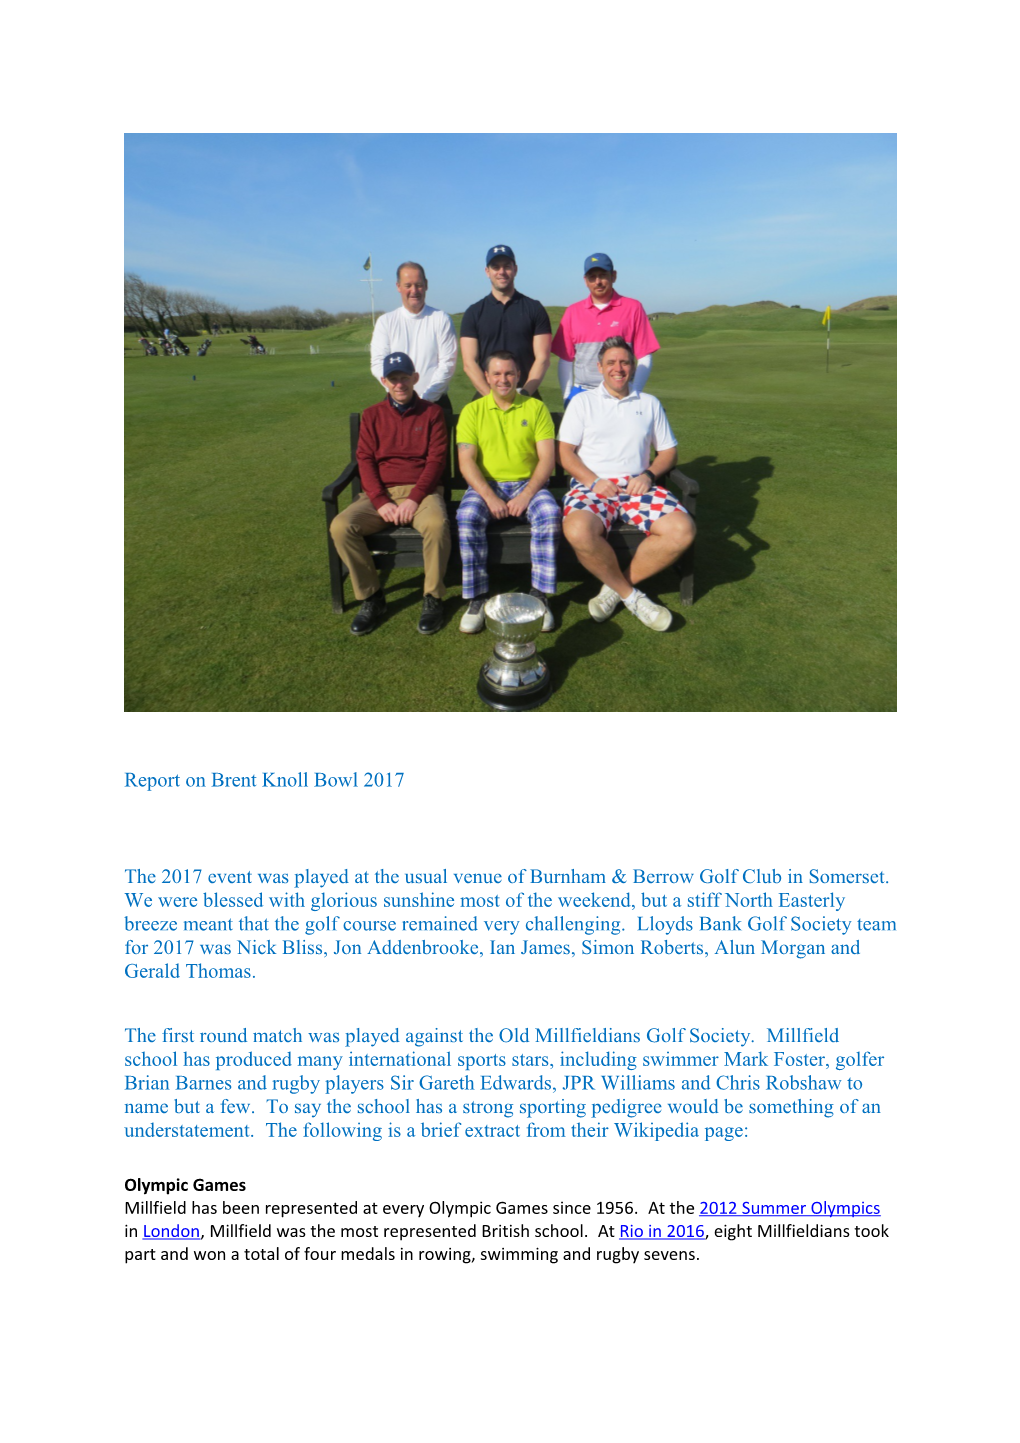 Report on Brent Knoll Bowl 2017